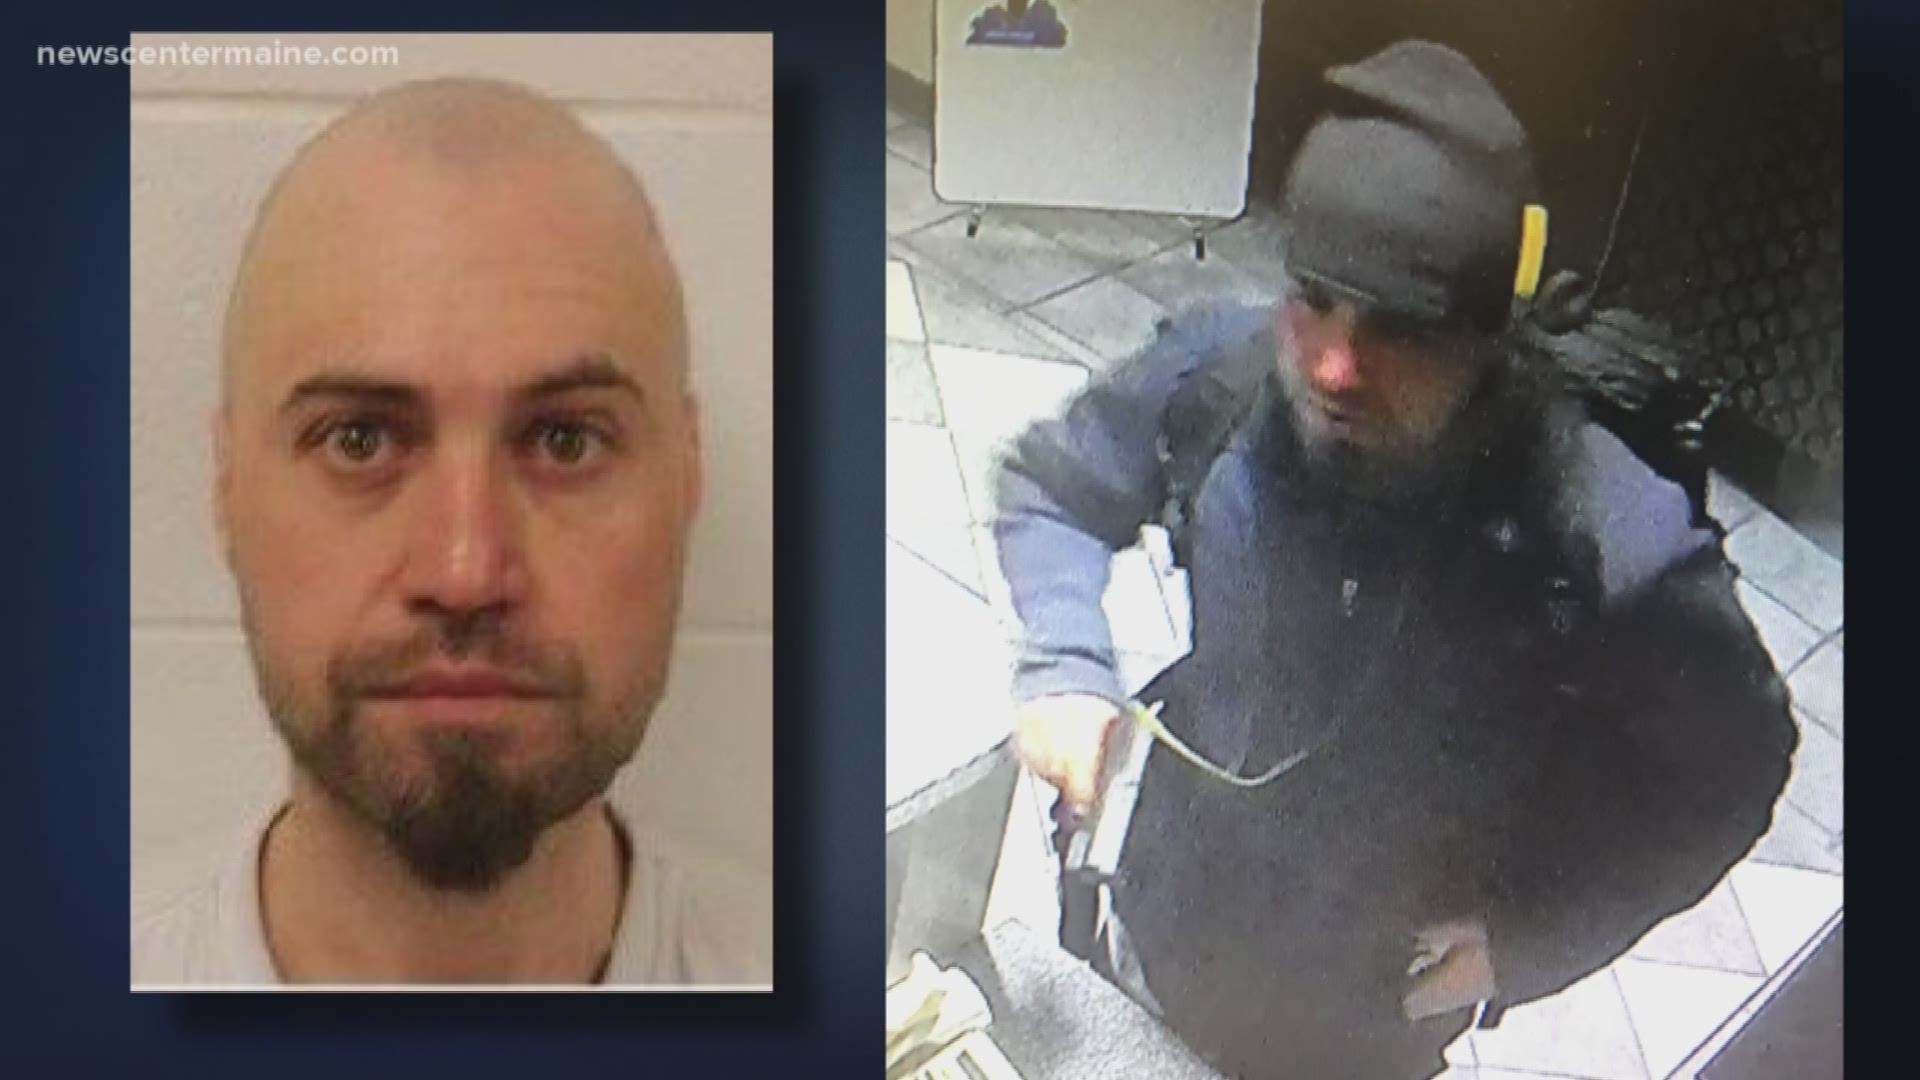 Saco Police caught the man suspected of an armed robbery at the Ramada Hotel Sunday evening.